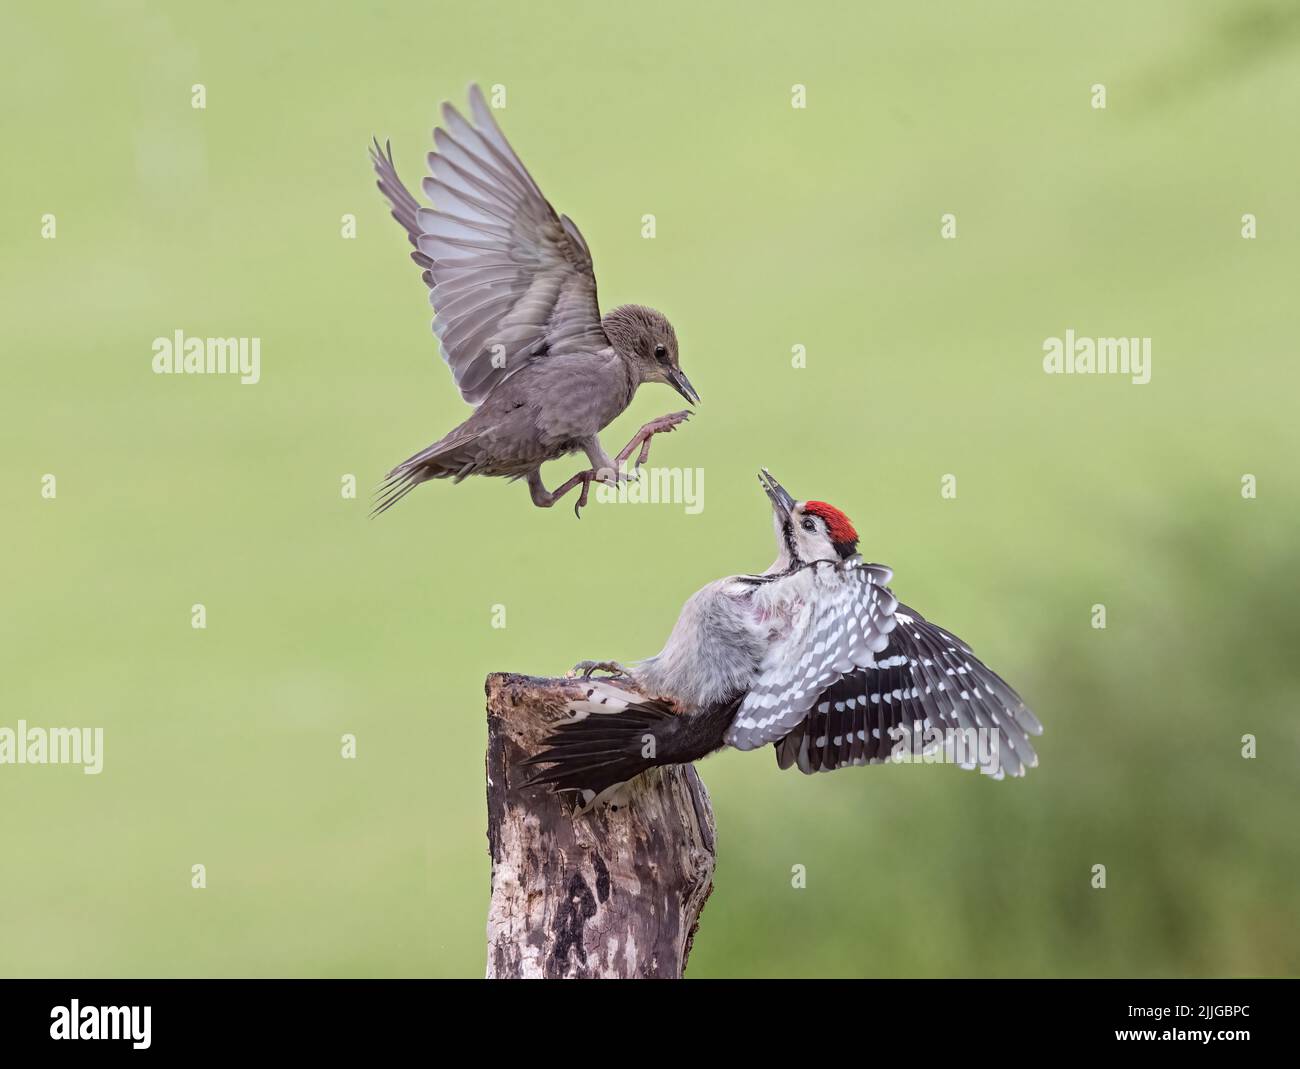 Juvenile Great Spotted Woodpecker, Dendrocopos major, in dispute with young Starling, Sturnus vulgaris, Lancashire, UK Stock Photo